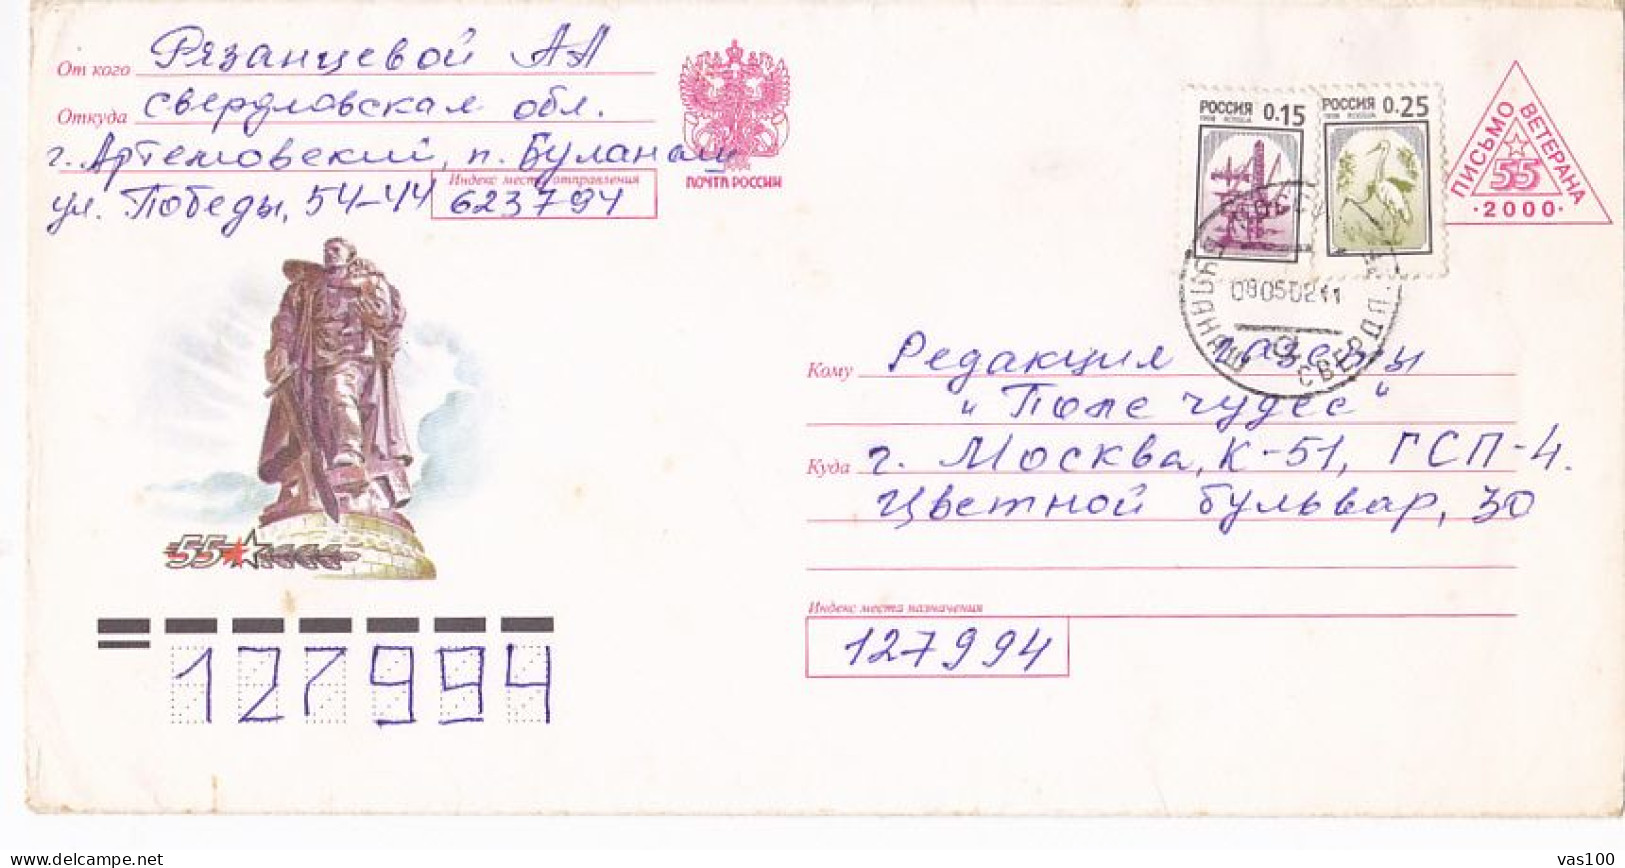 END OF WW2 ANNIVERSARY, MONUMENT, COVER STATIONERY, ENTIER POSTAL, 2000, RUSSIA - Interi Postali